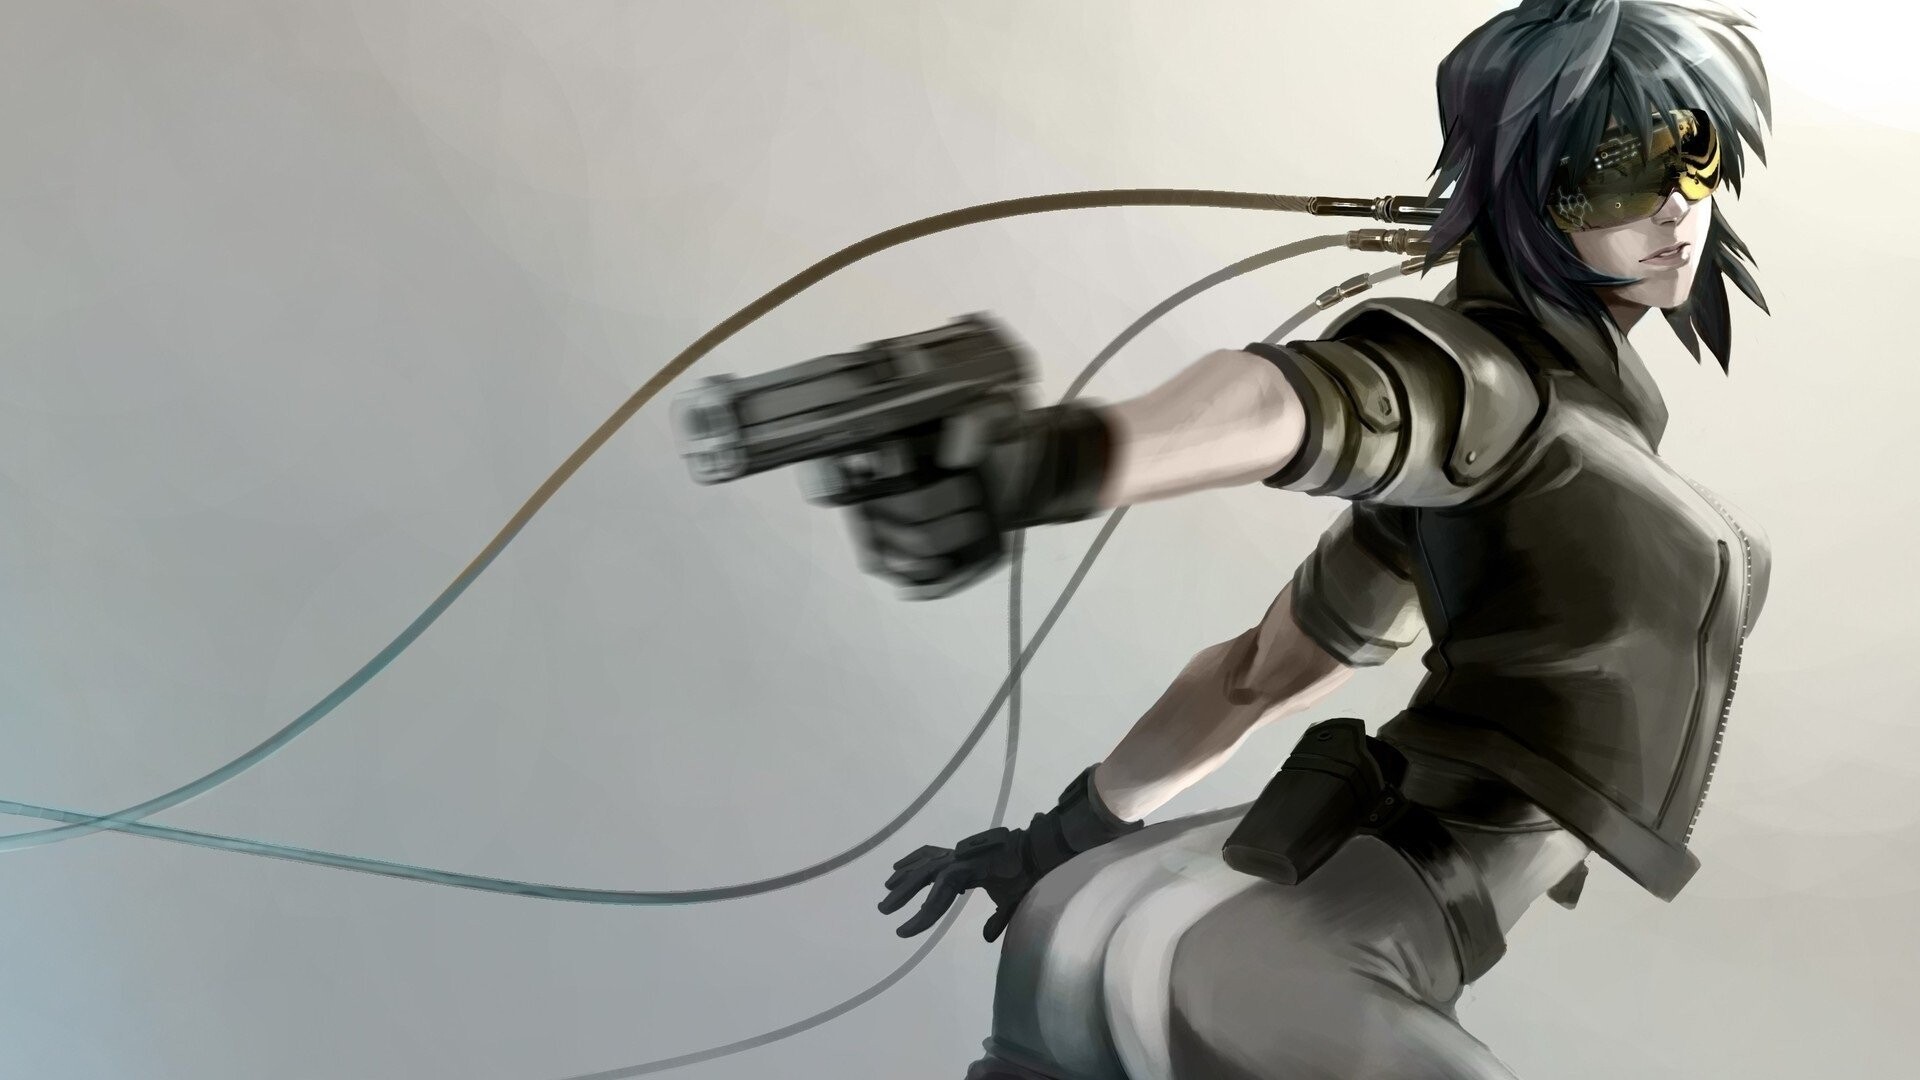 Ghost in the Shell (Anime): Motoko Kusanagi, The leading character of the popular media franchise, Acting field operative. 1920x1080 Full HD Background.